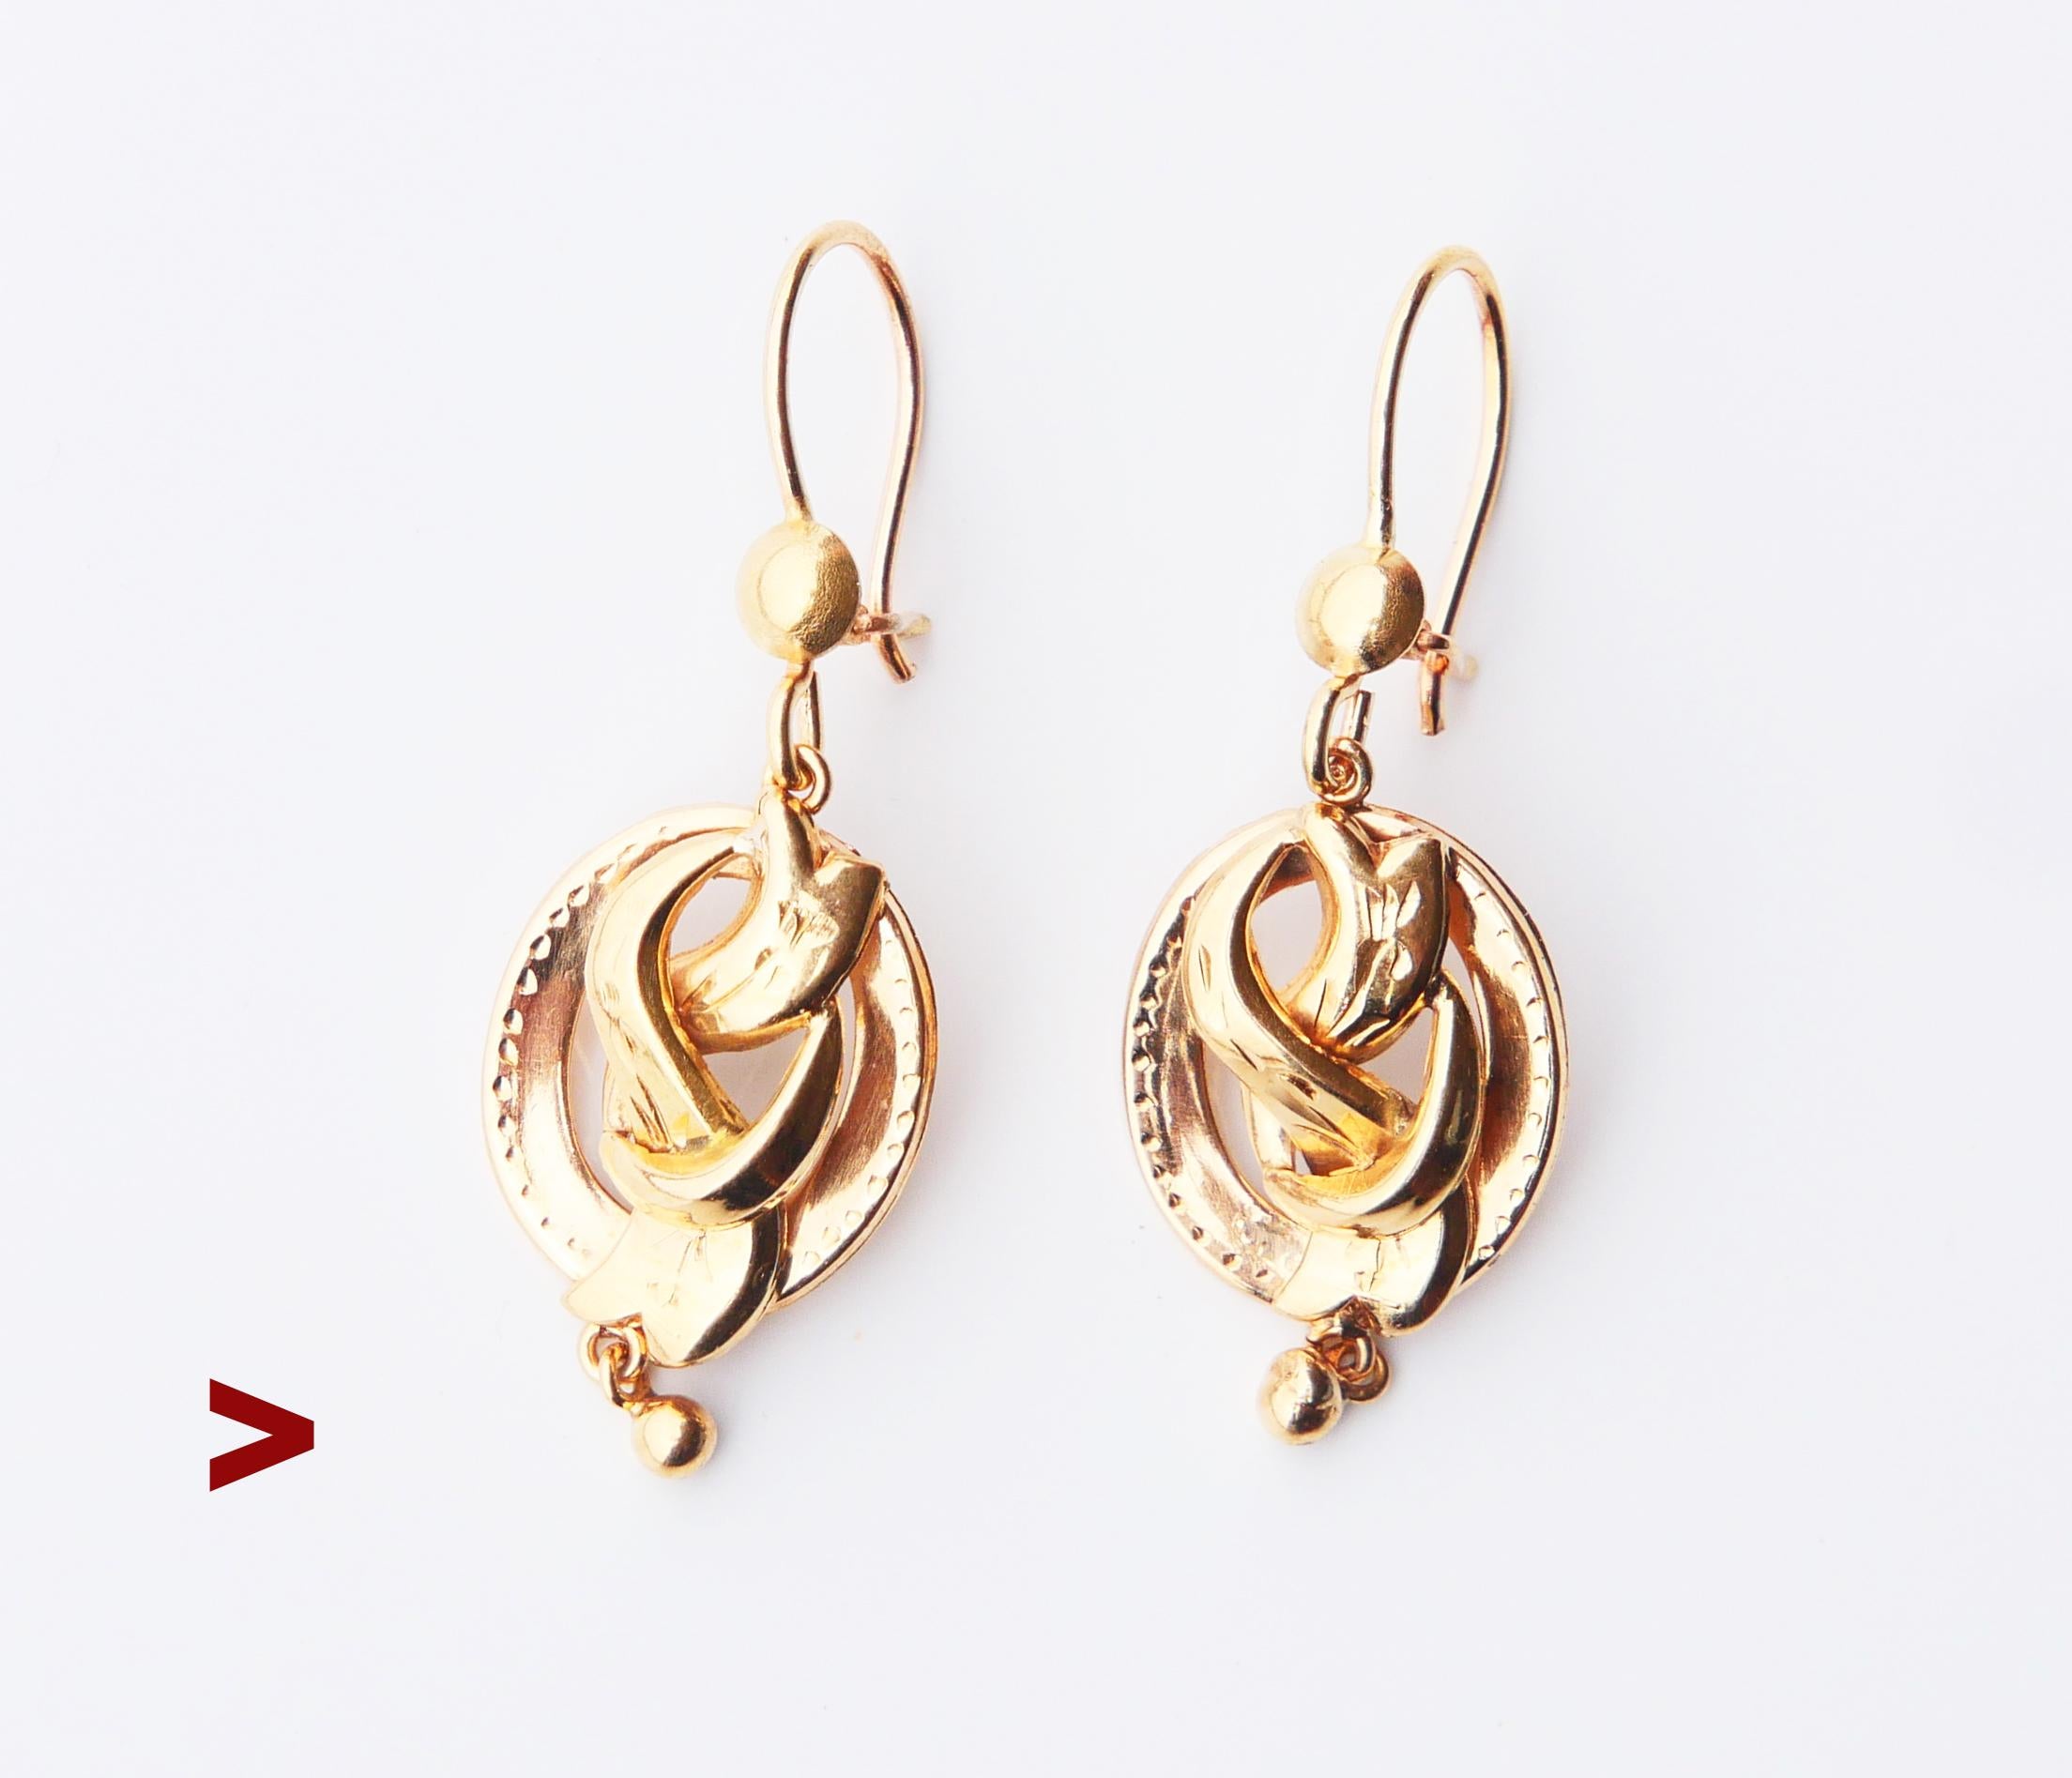 A pair of antique earrings with bodies designed as knots in solid 18K Yellow Gold. Both engraved with ornaments, terminated with freely suspended drop shaped dangles.

Made ca. 1920s -1930s , such designs were popular in Europe in late 19th - early